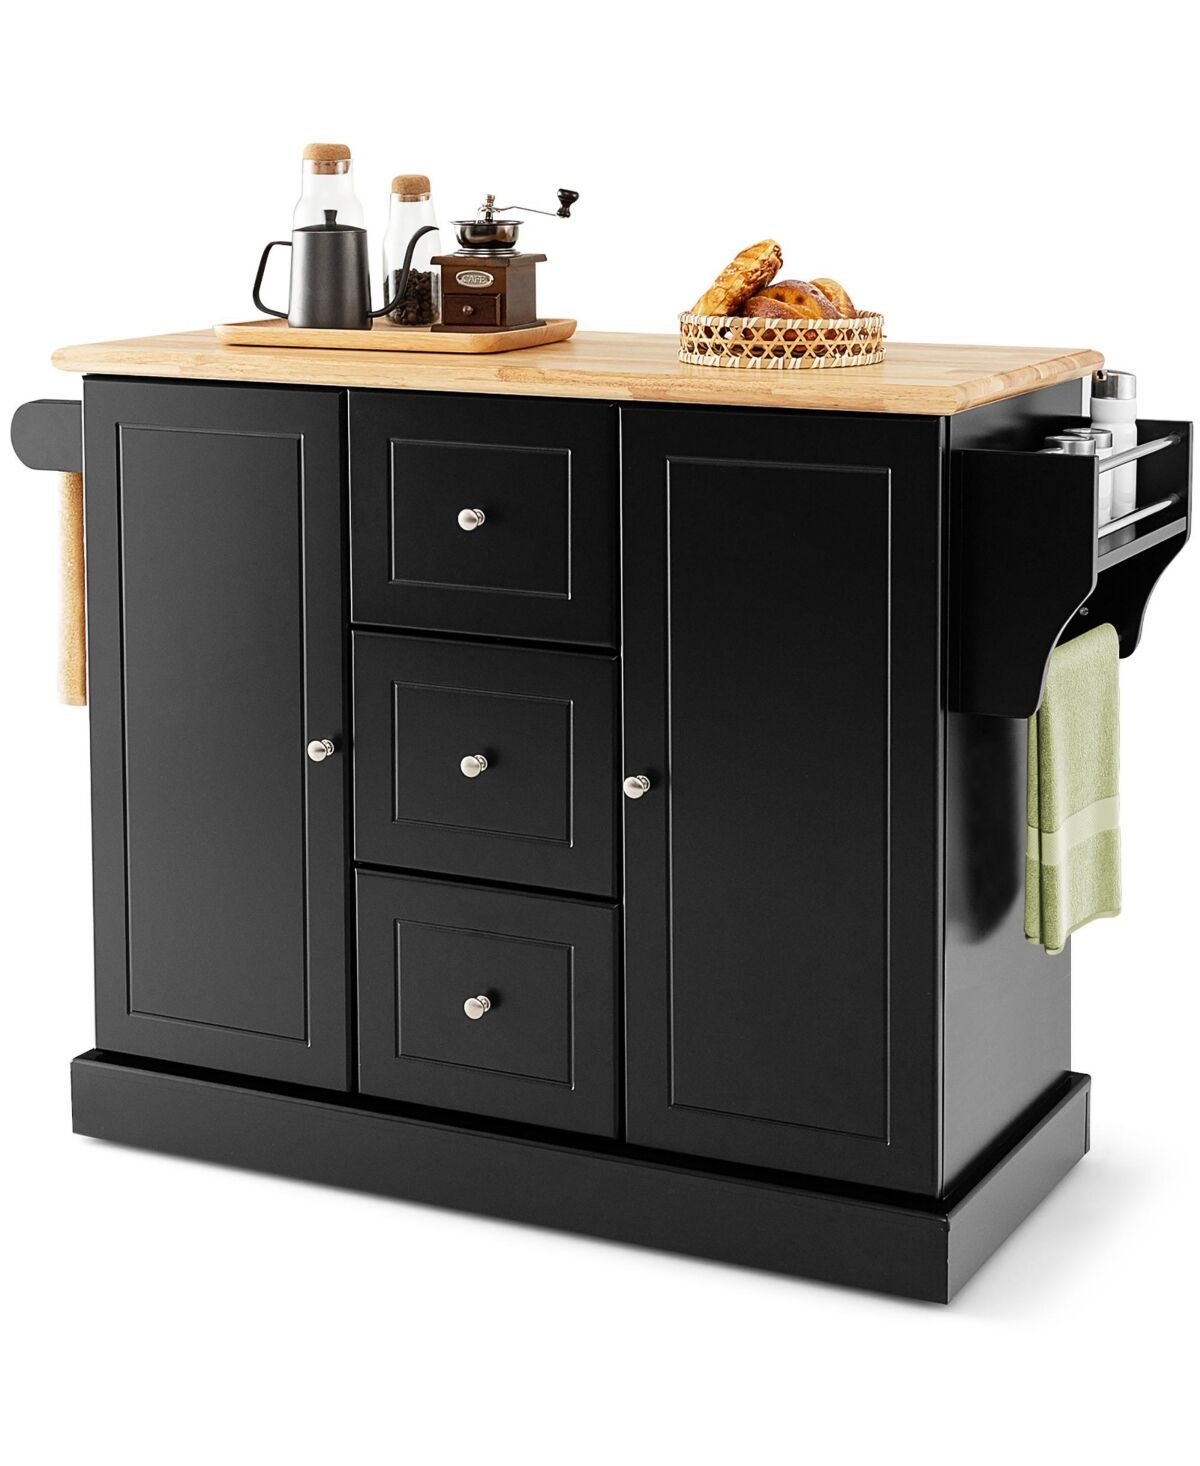 Costway Kitchen Island on Wheels Rolling Utility Cart Drawers Cabinets Spice Rack - Black